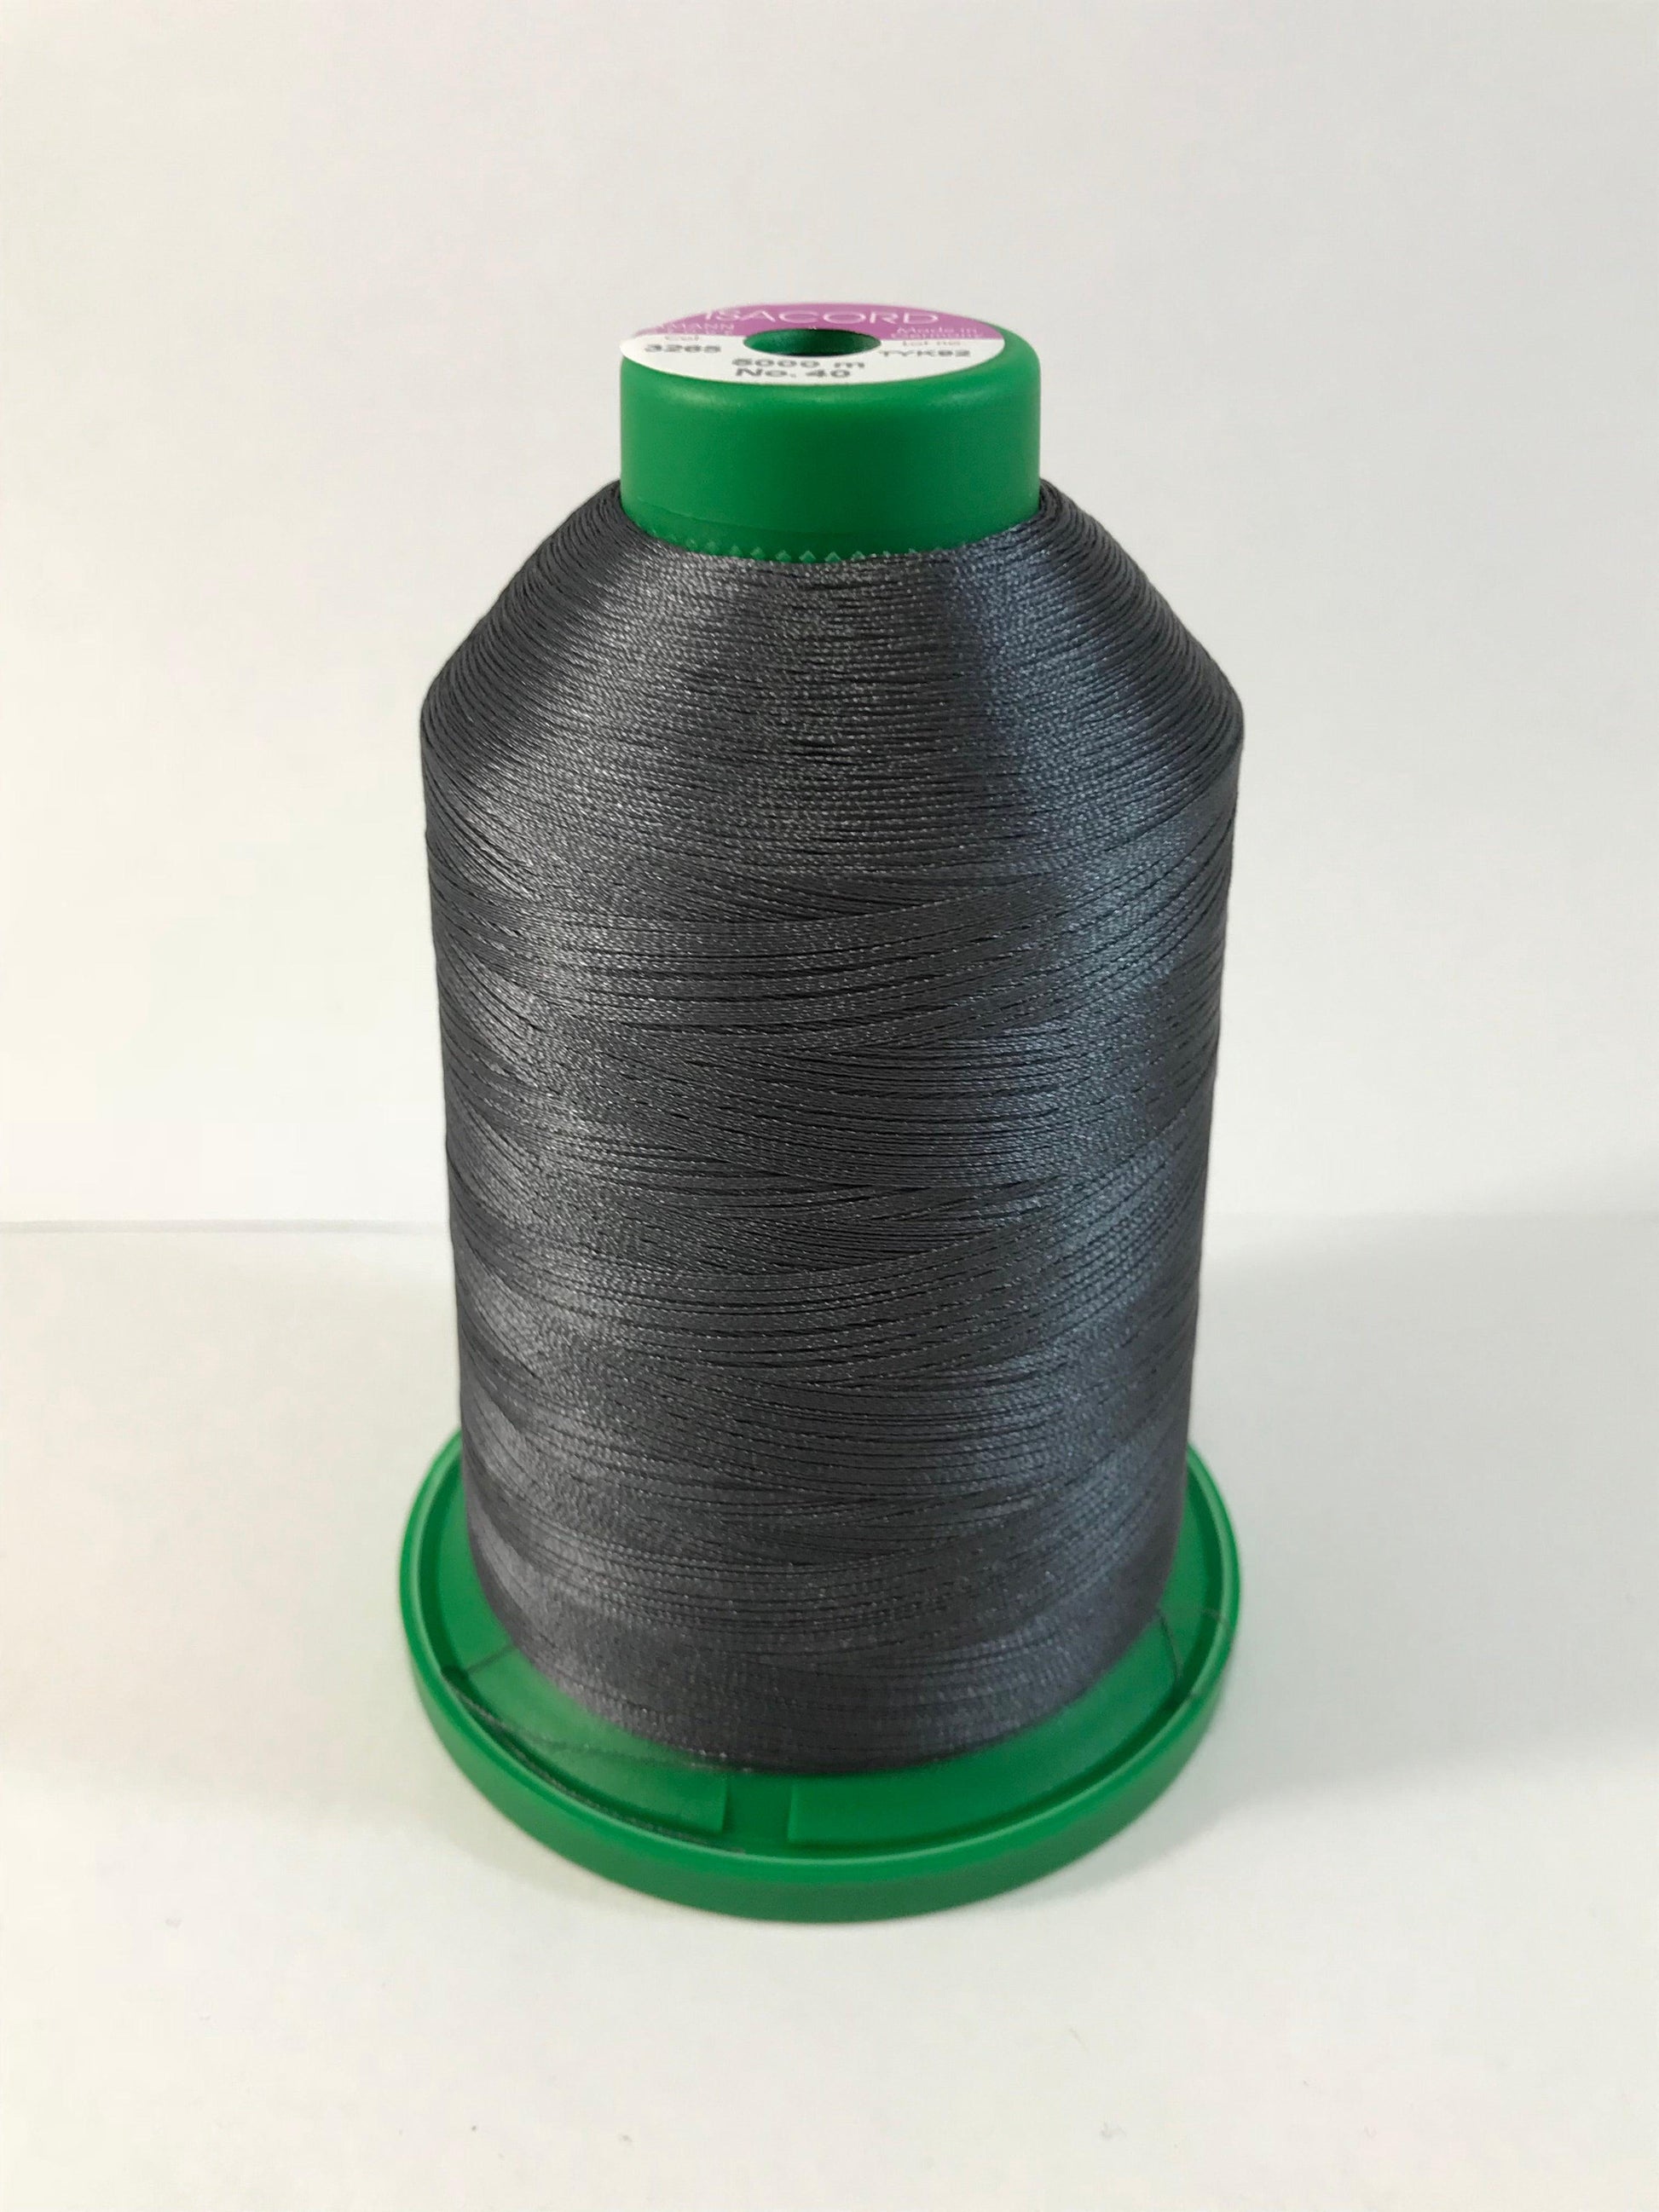 3265 - SLATE GRAY - ISACORD EMBROIDERY THREAD 40 WT – Embroidery Supply Shop